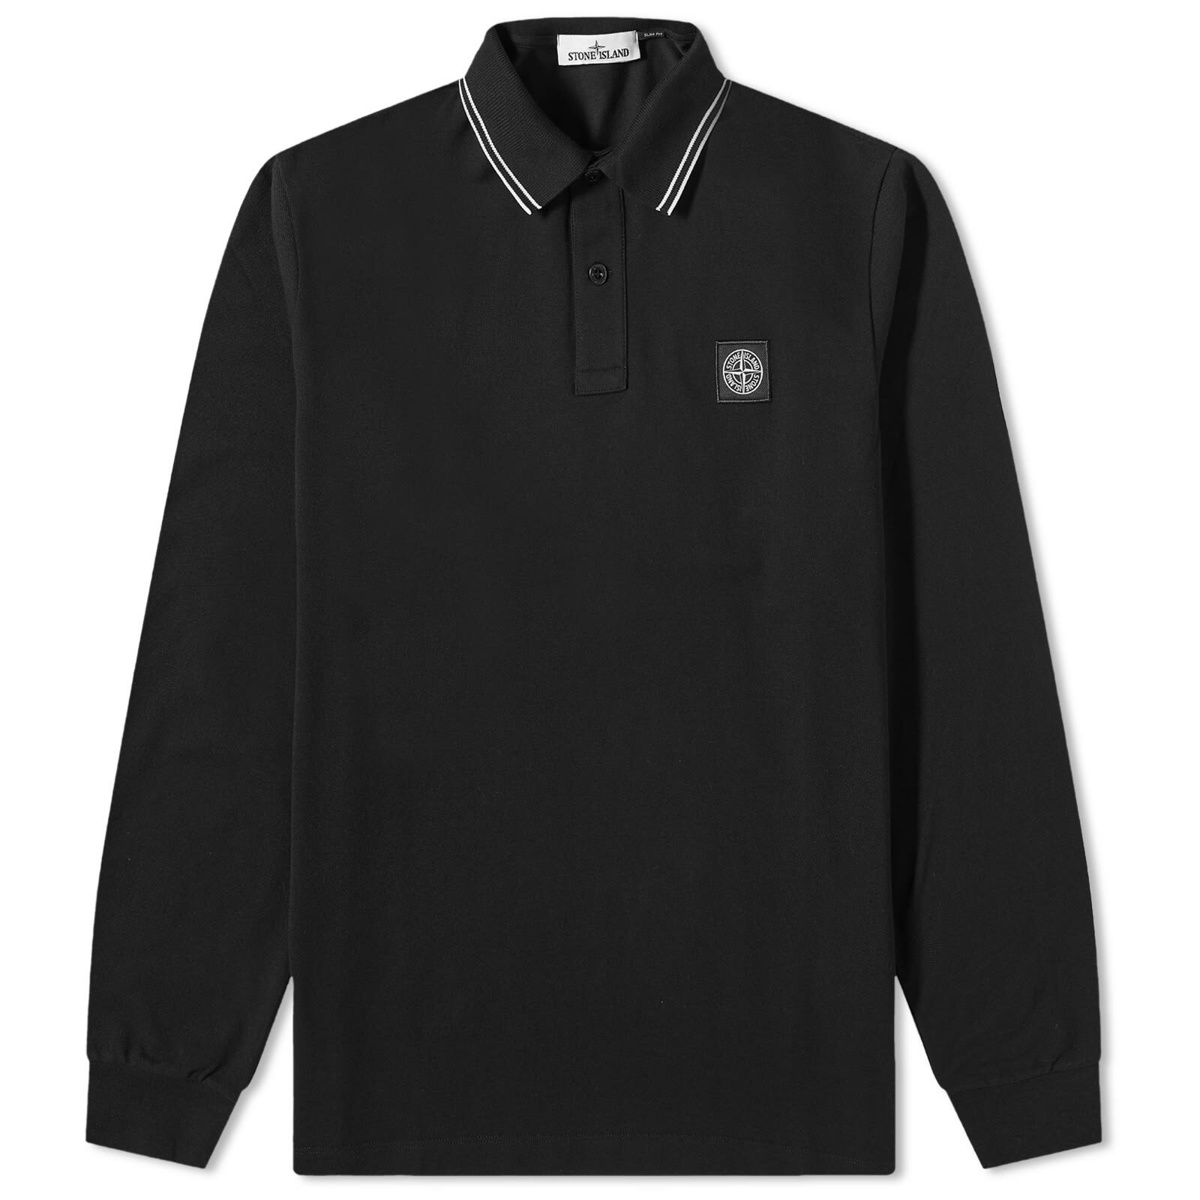 Stone Island Men's Long Sleeve Patch Polo Shirt in Navy Stone Island